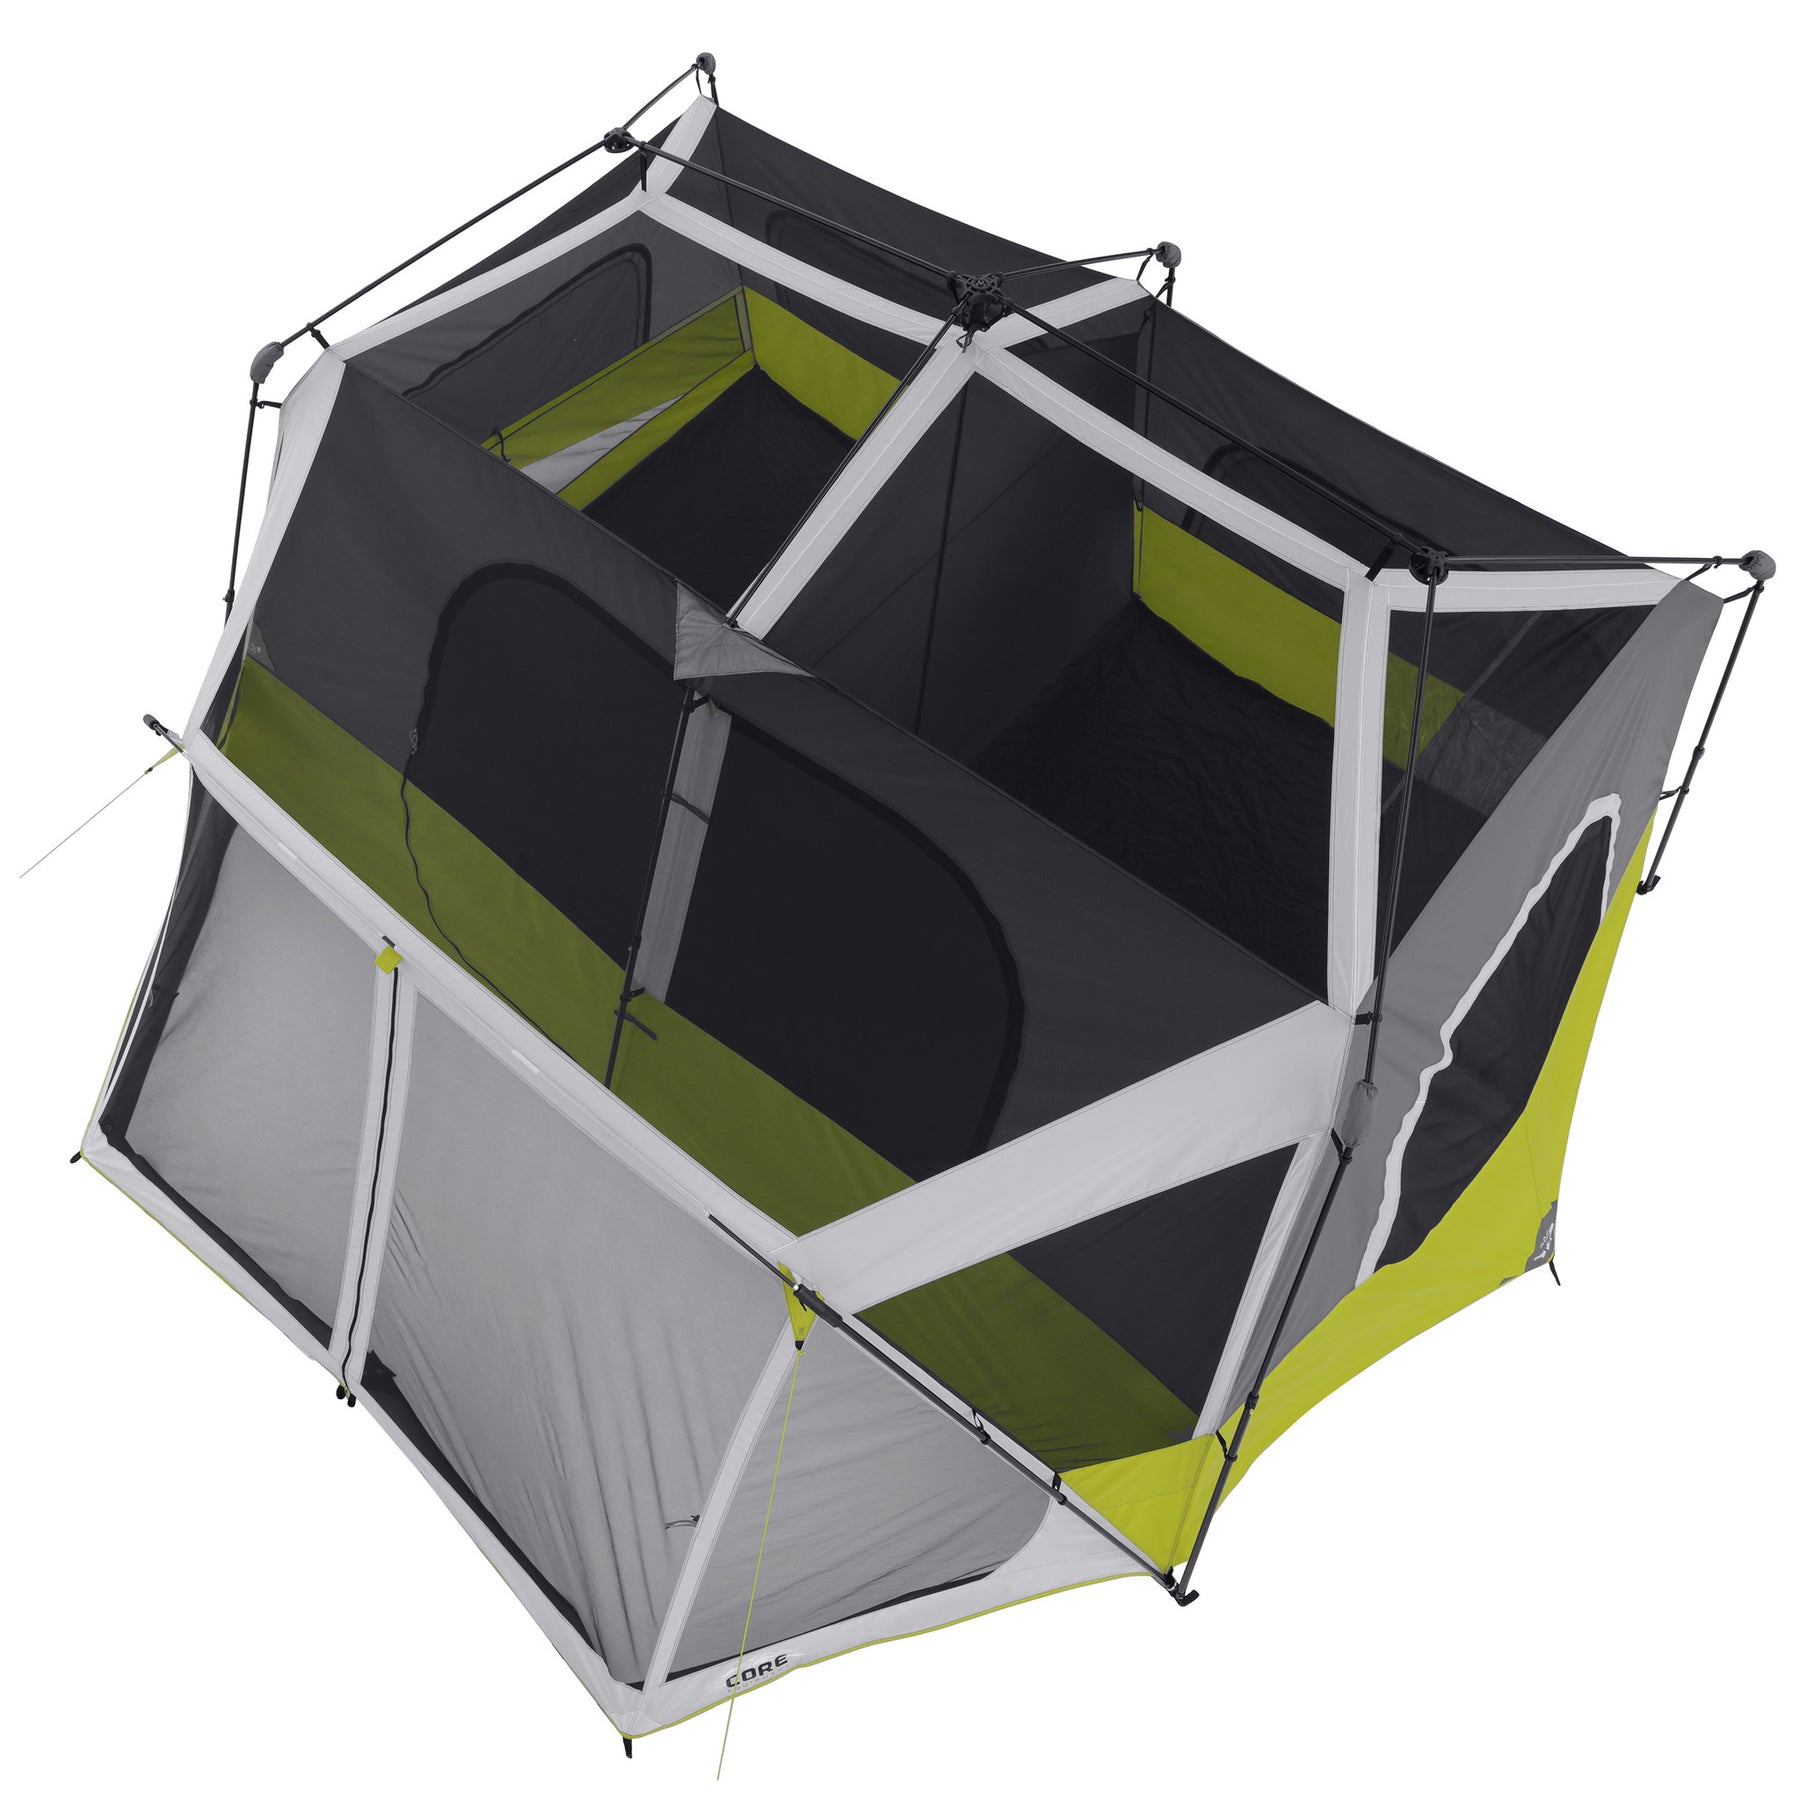 10 Person Family Cabin Tent, 2 Room Huge Tent with Storage Pockets for  Camping Accessories